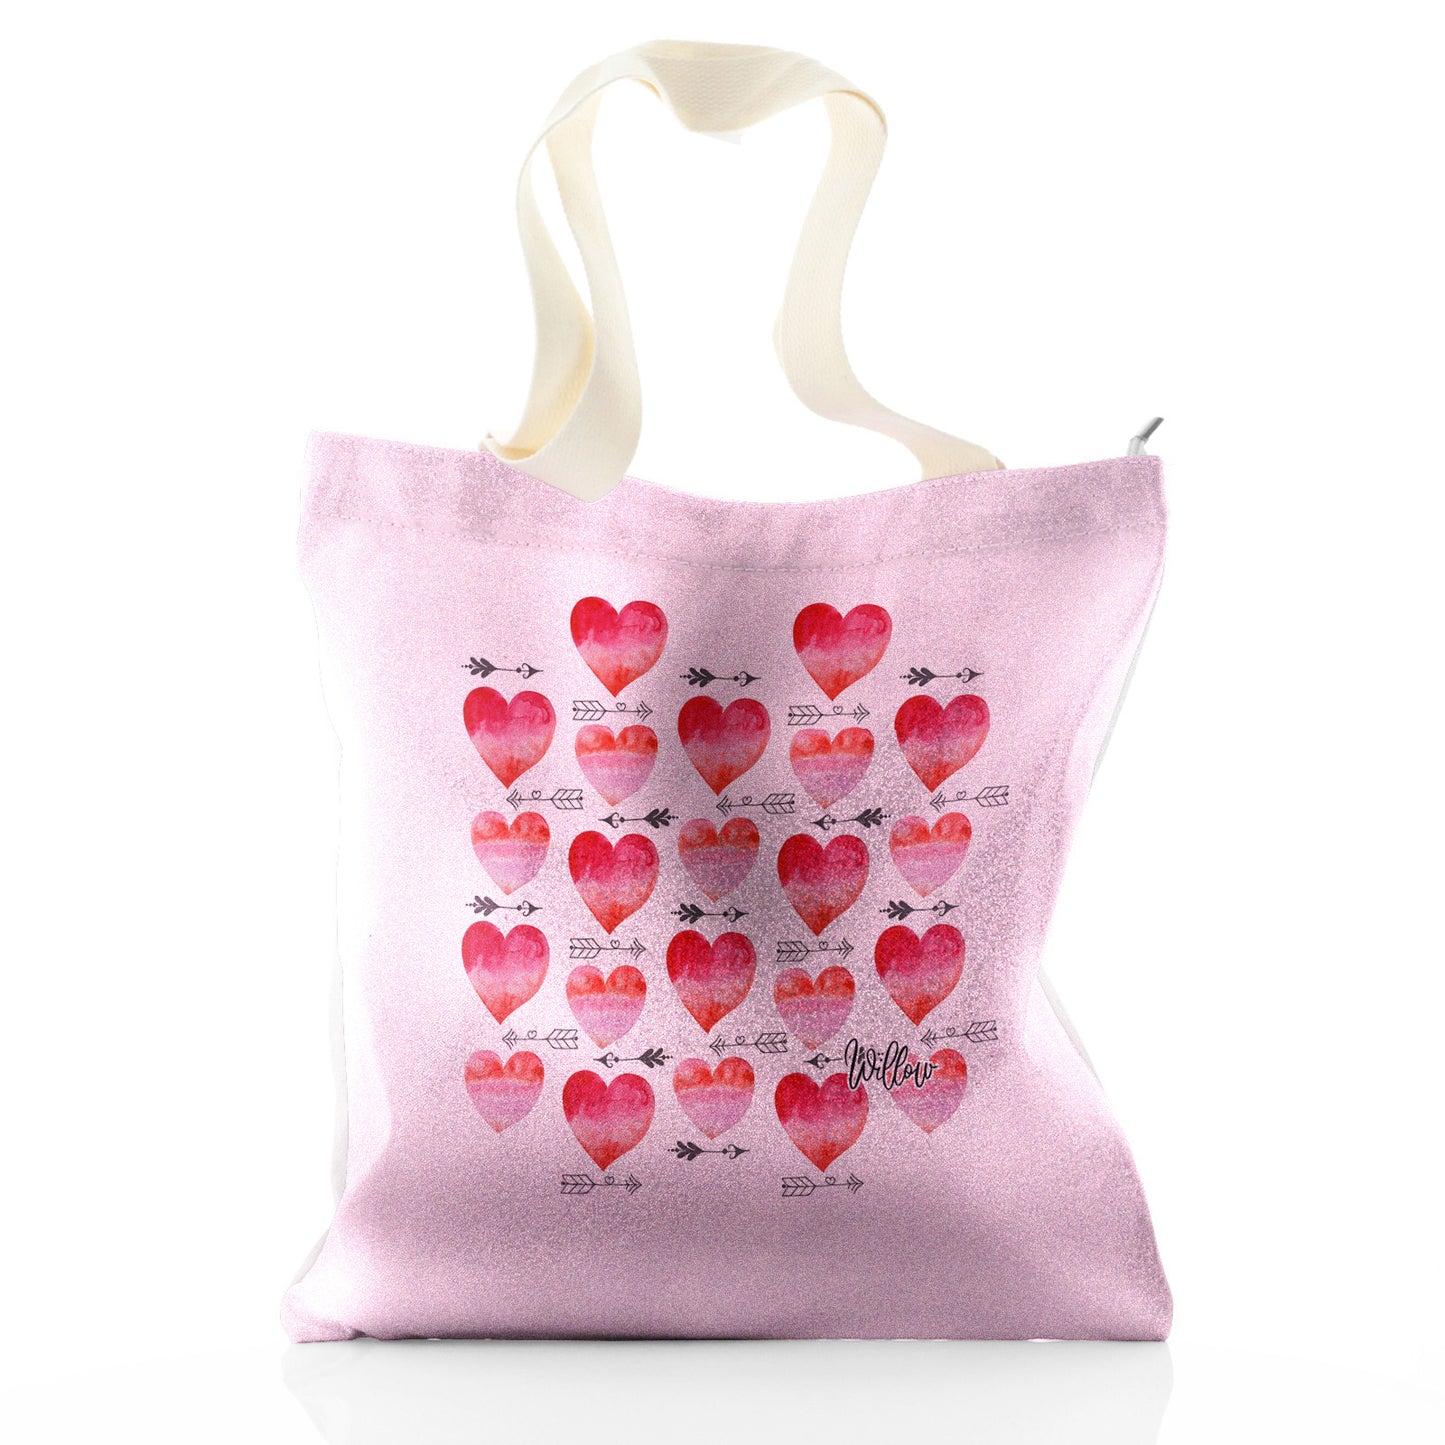 Personalised Glitter Tote Bag with Stylish Text and Arrow Love Hearts Print